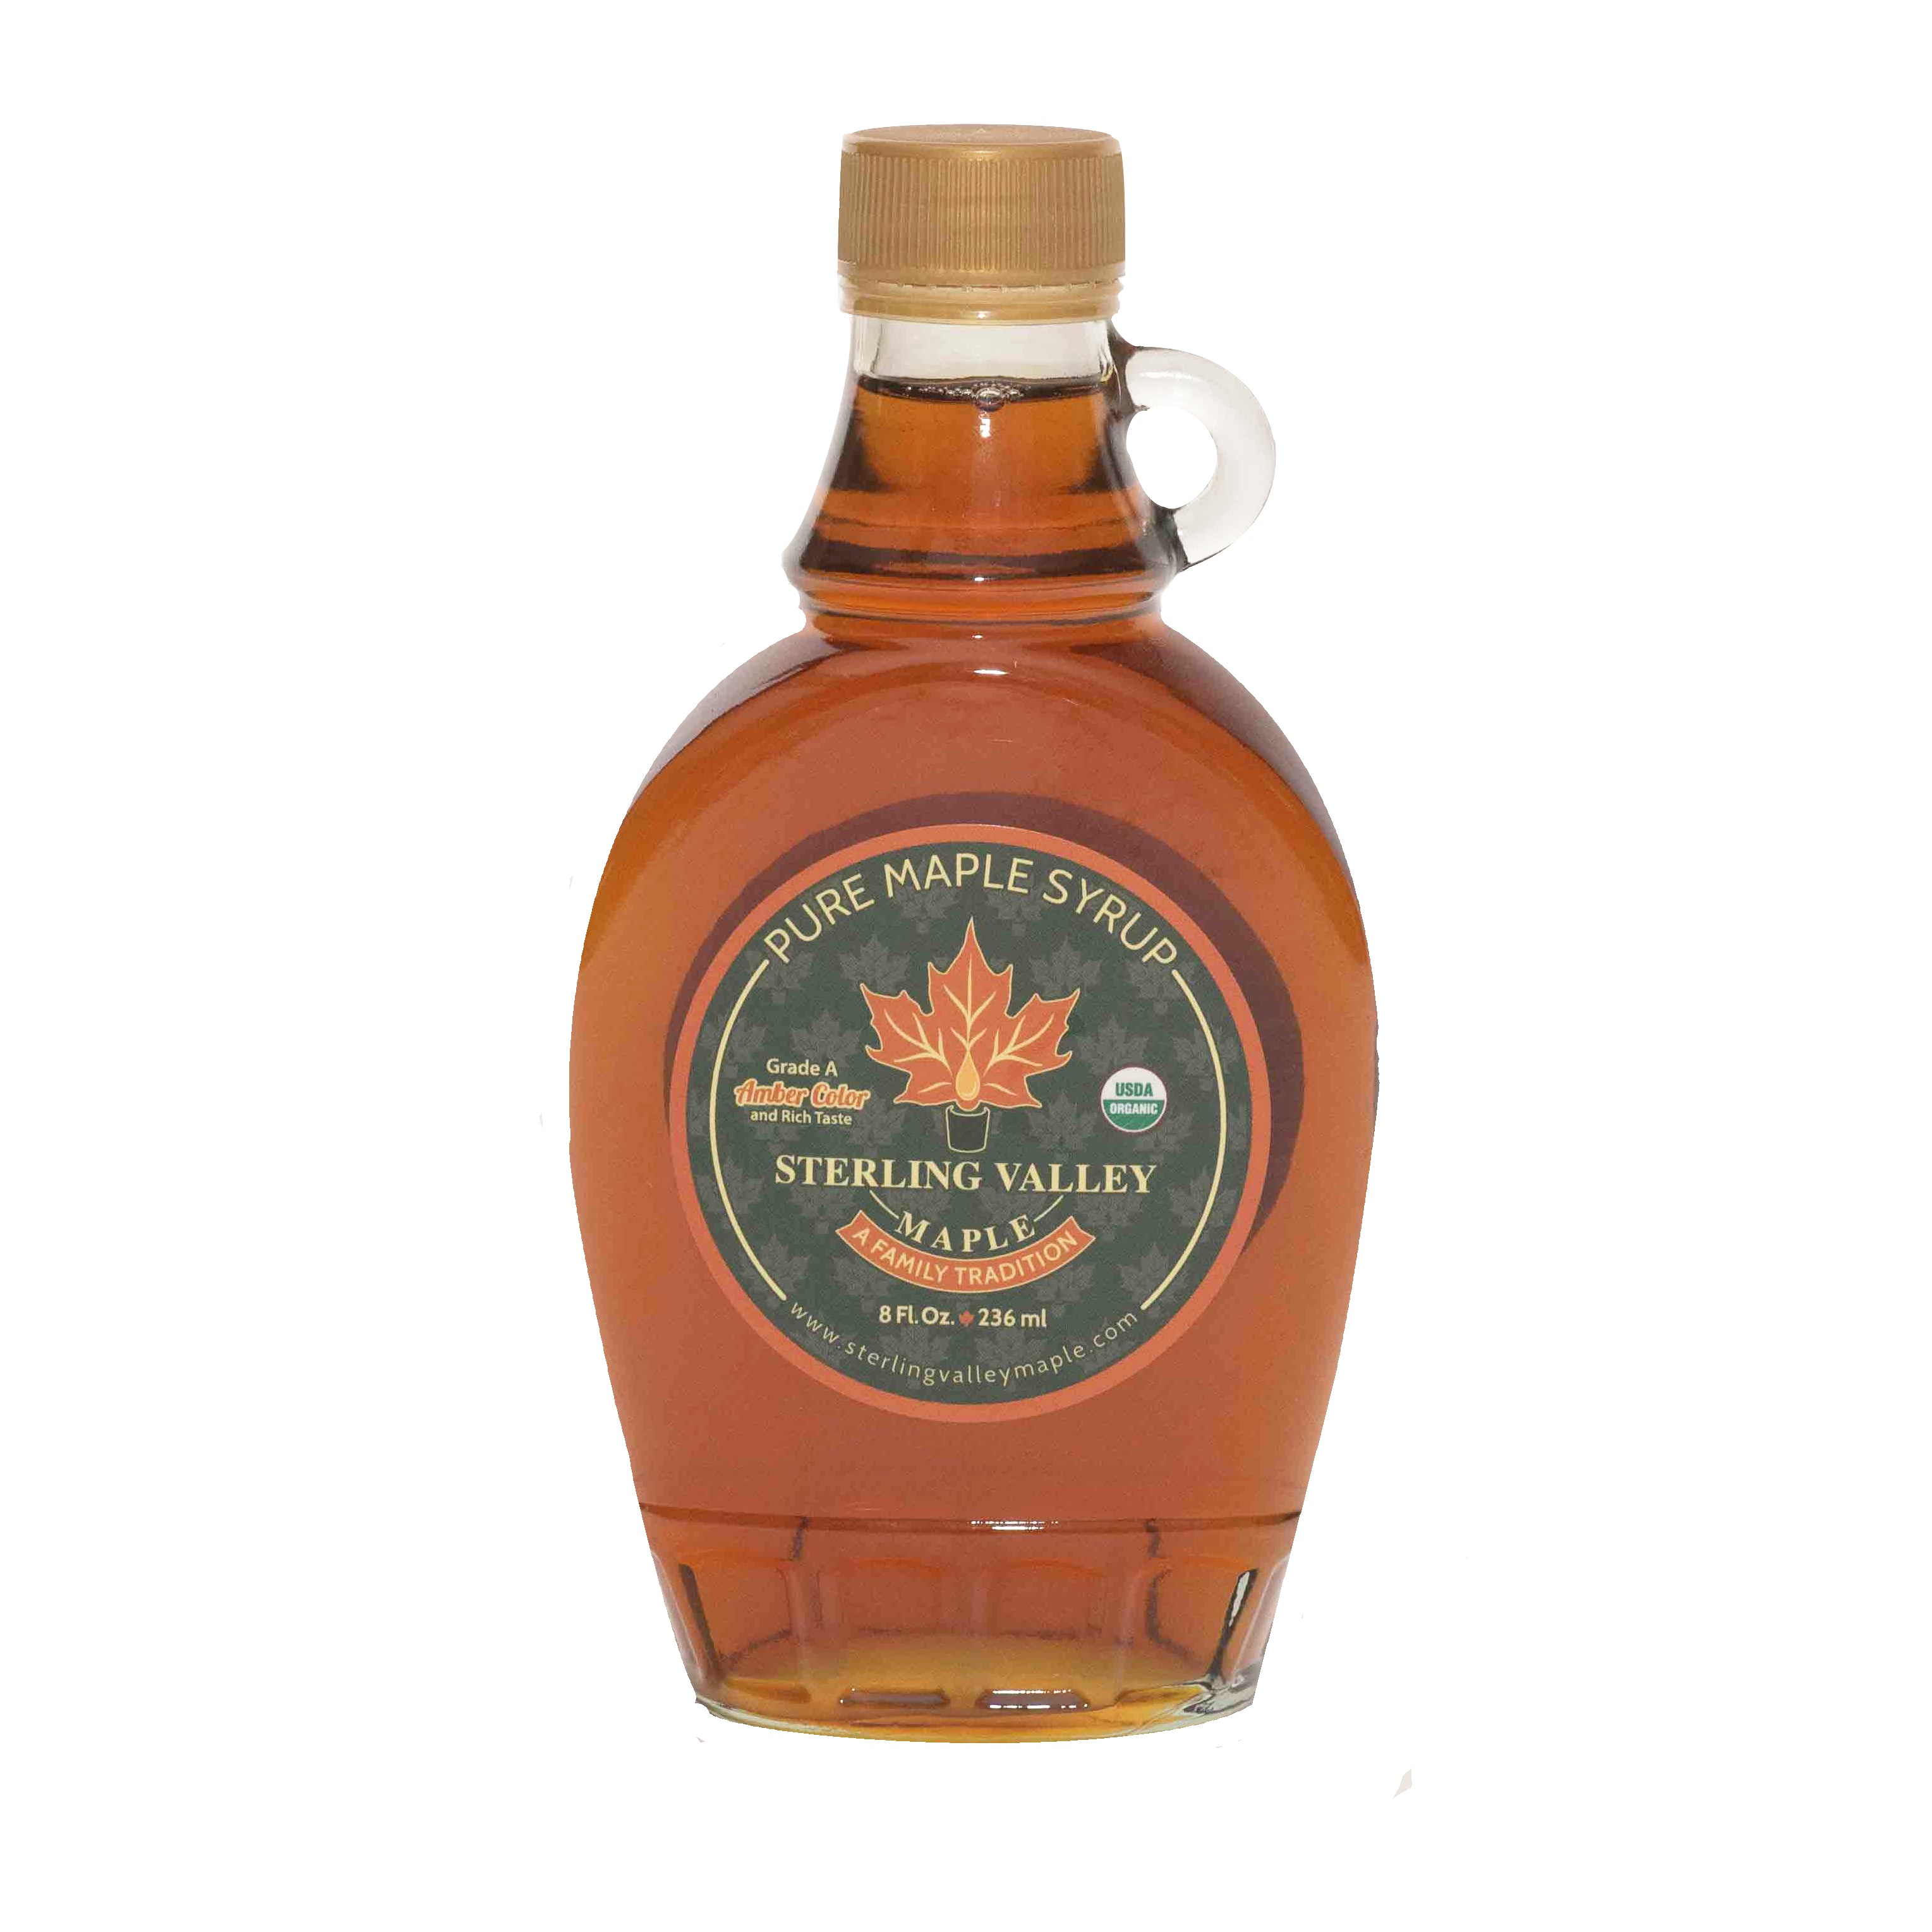 Certified Organic Syrup: 8oz Glass Container of Maple Syrup